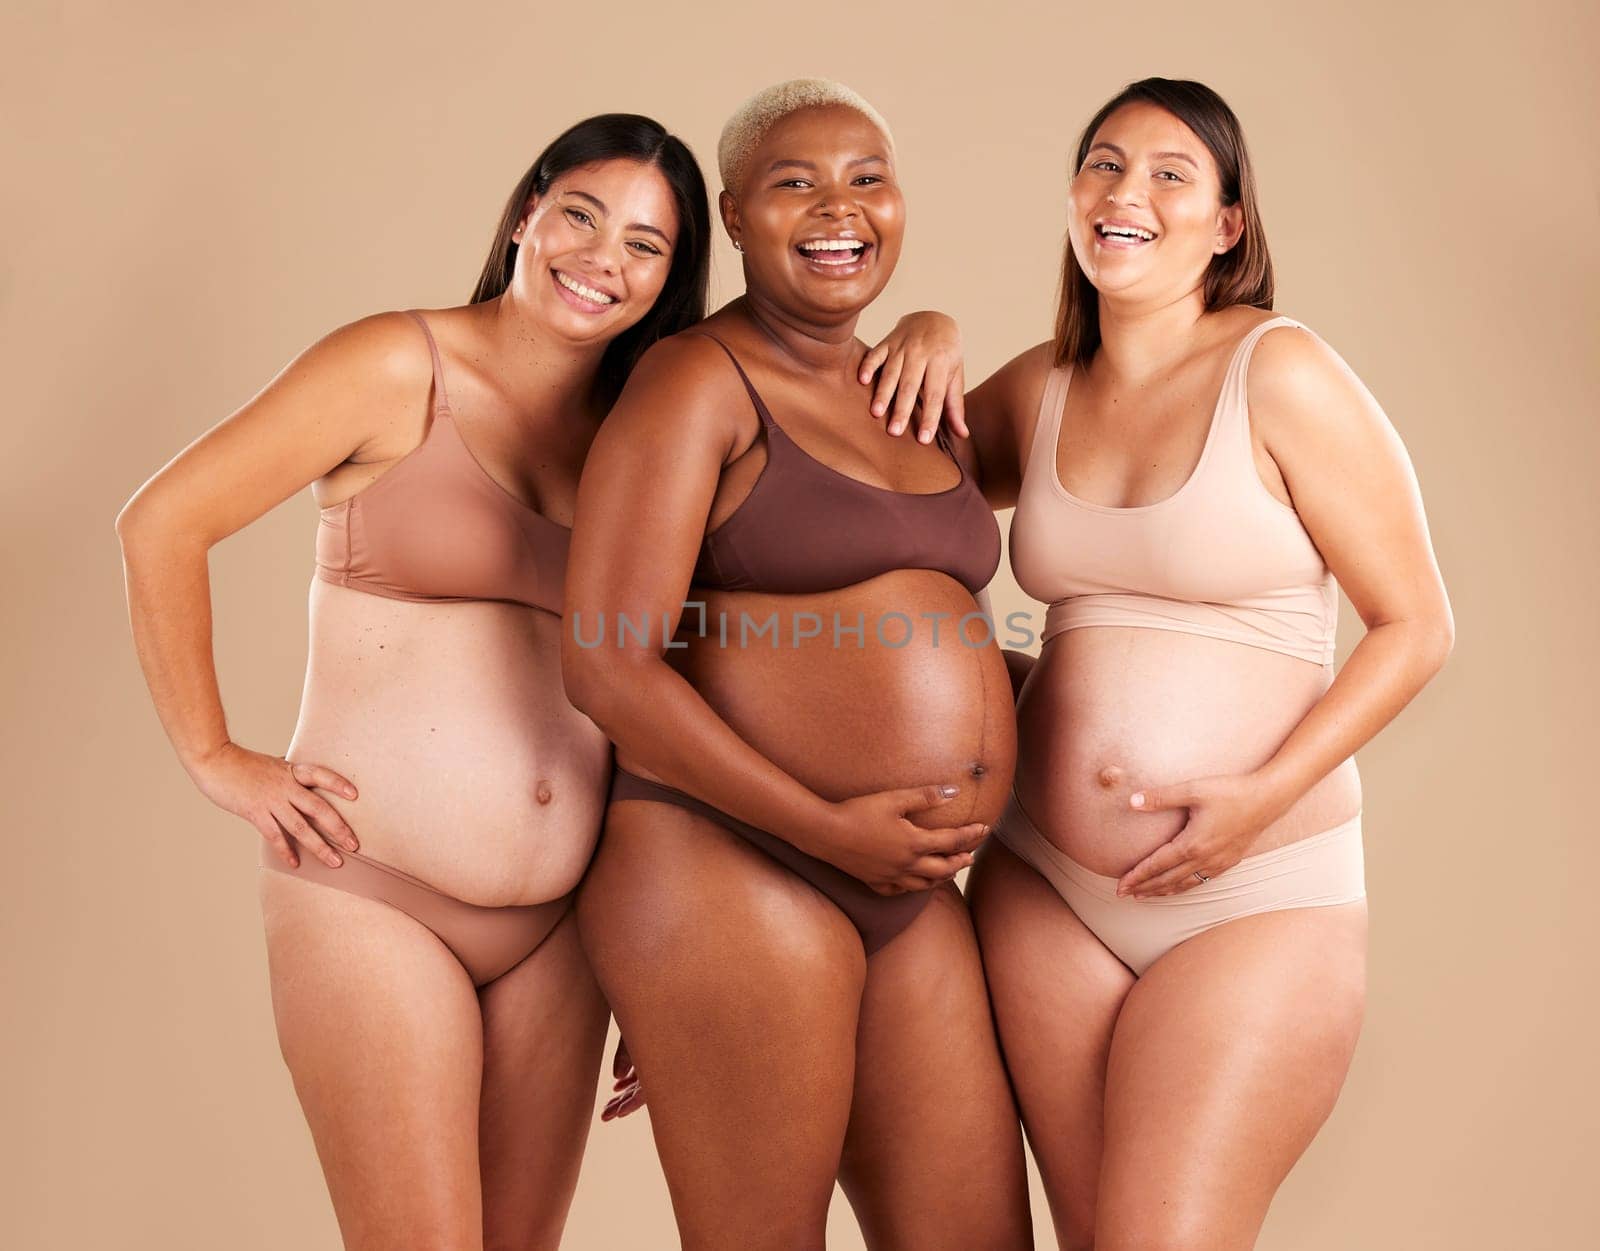 Portrait, beauty and laugh with pregnant friends in studio on a beige background for diversity or motherhood. Family, love and pregnancy with a woman friend group showing their baby bump stomach.